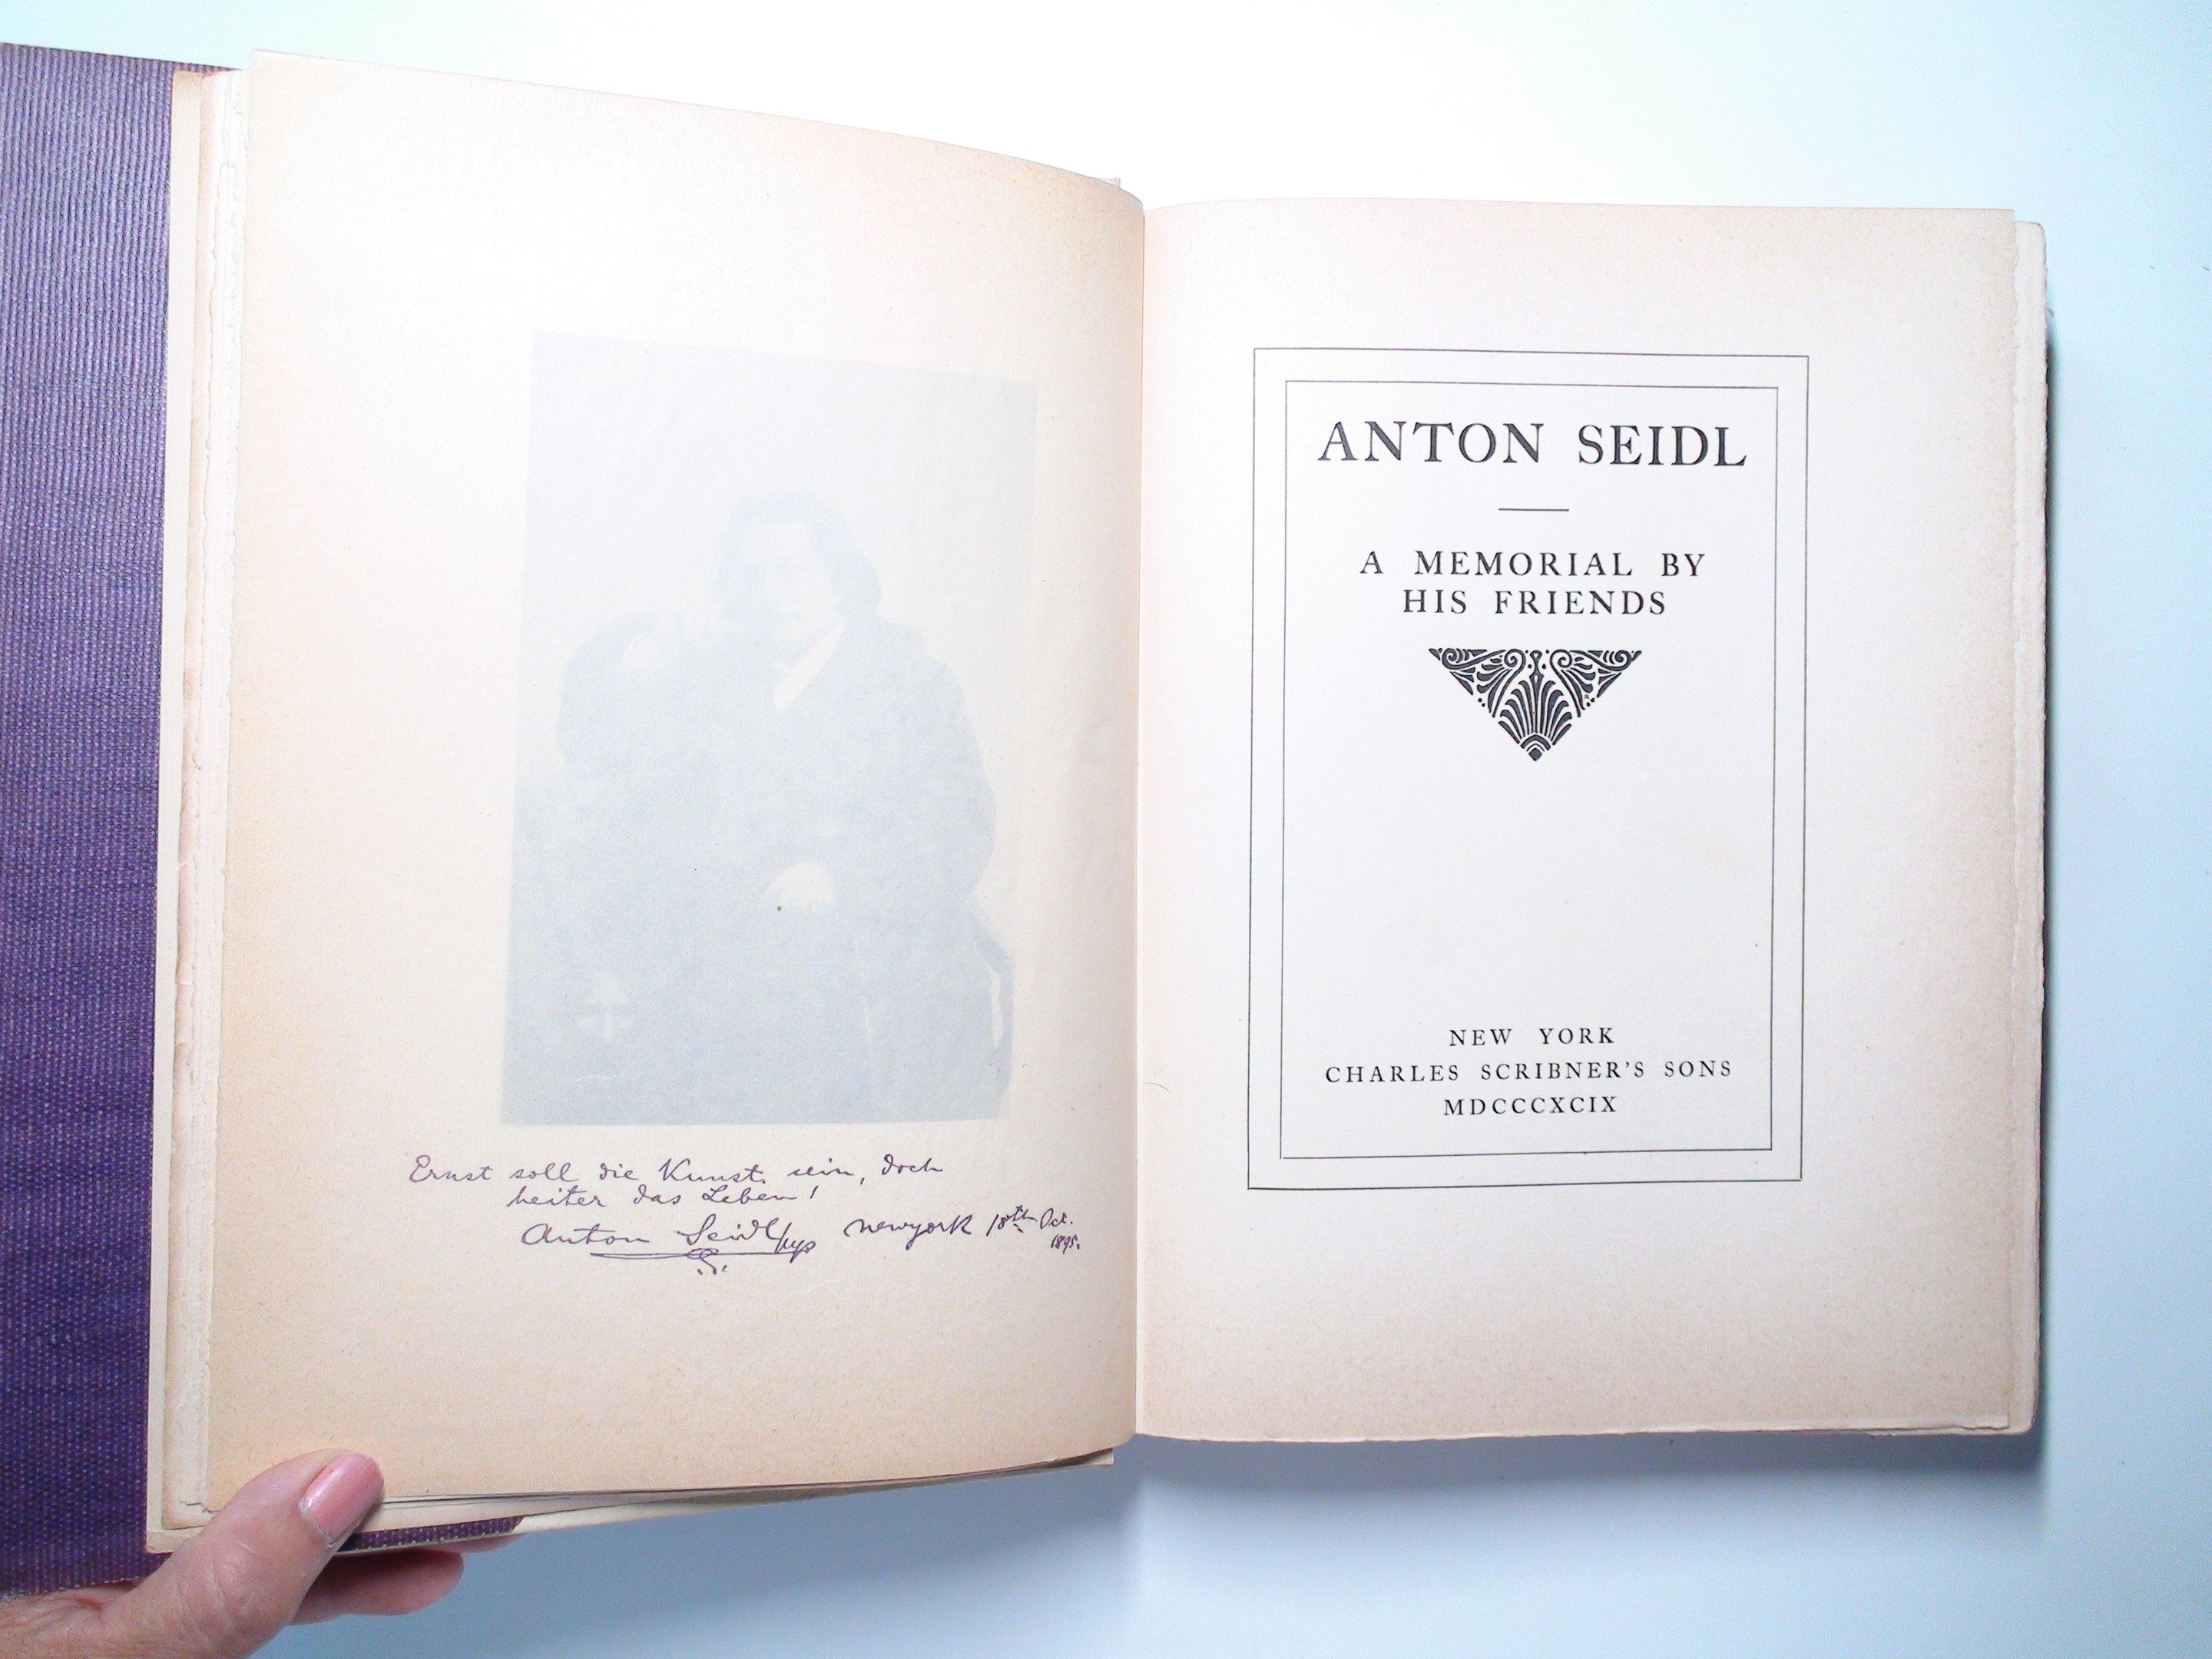 Anton Seidl, A Memorial by His Friends, Hardcover w DJ, Numbered 895/1000, 1899